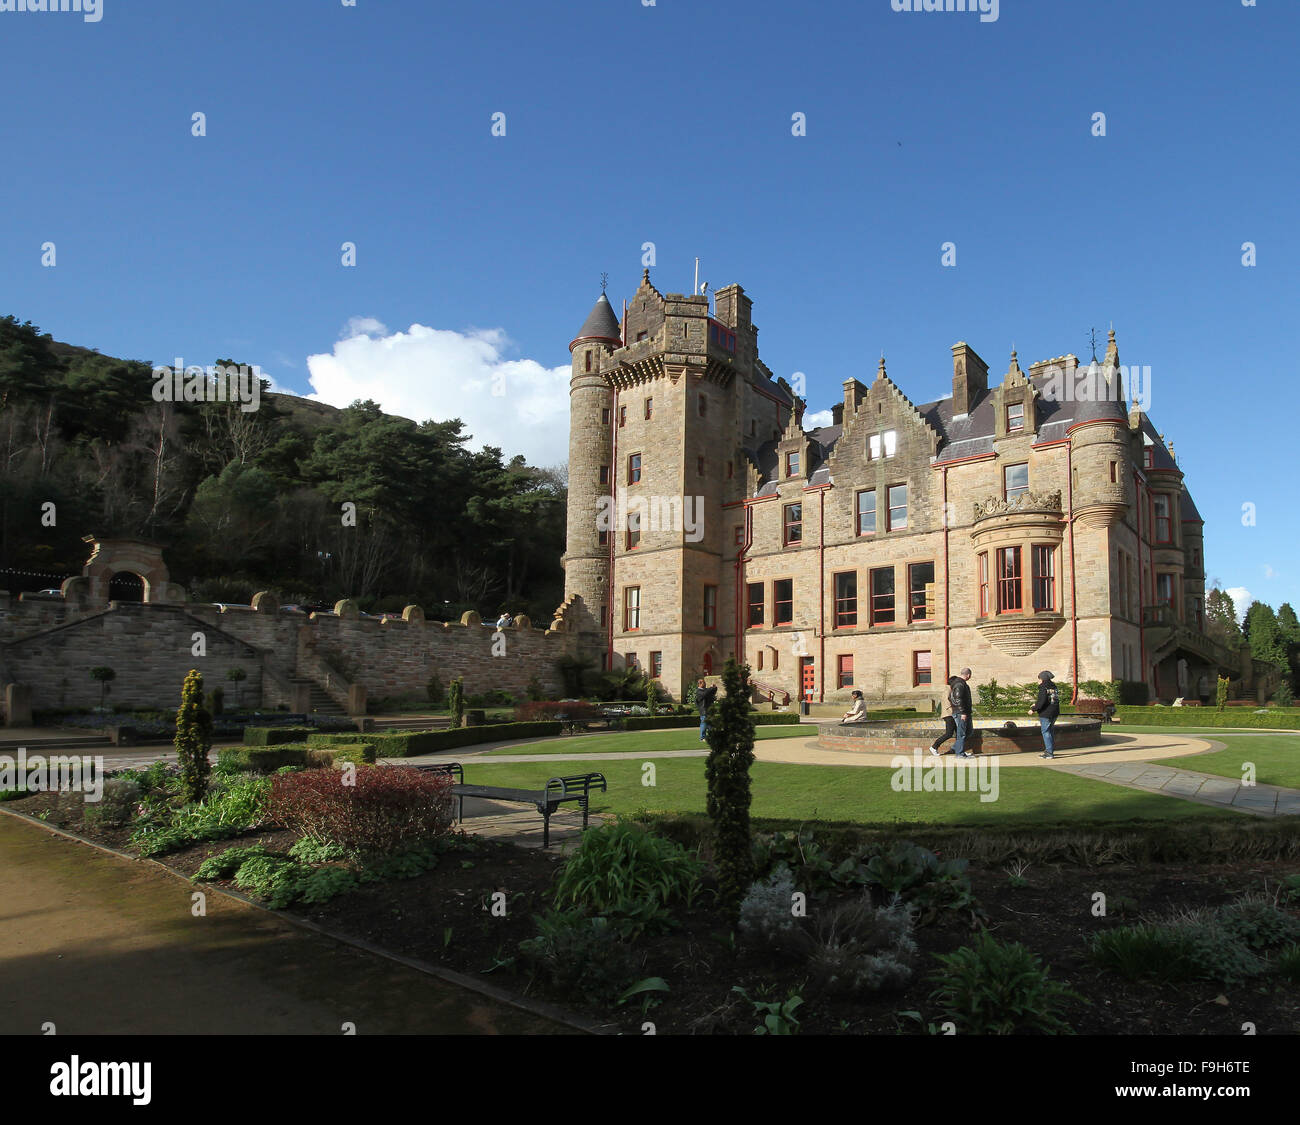 Belfast Castle in Cave Hill Country Park, Belfast, Northern Ireland. The Scottish baronial style castle overlooks the city and Belfast Lough. Stock Photo